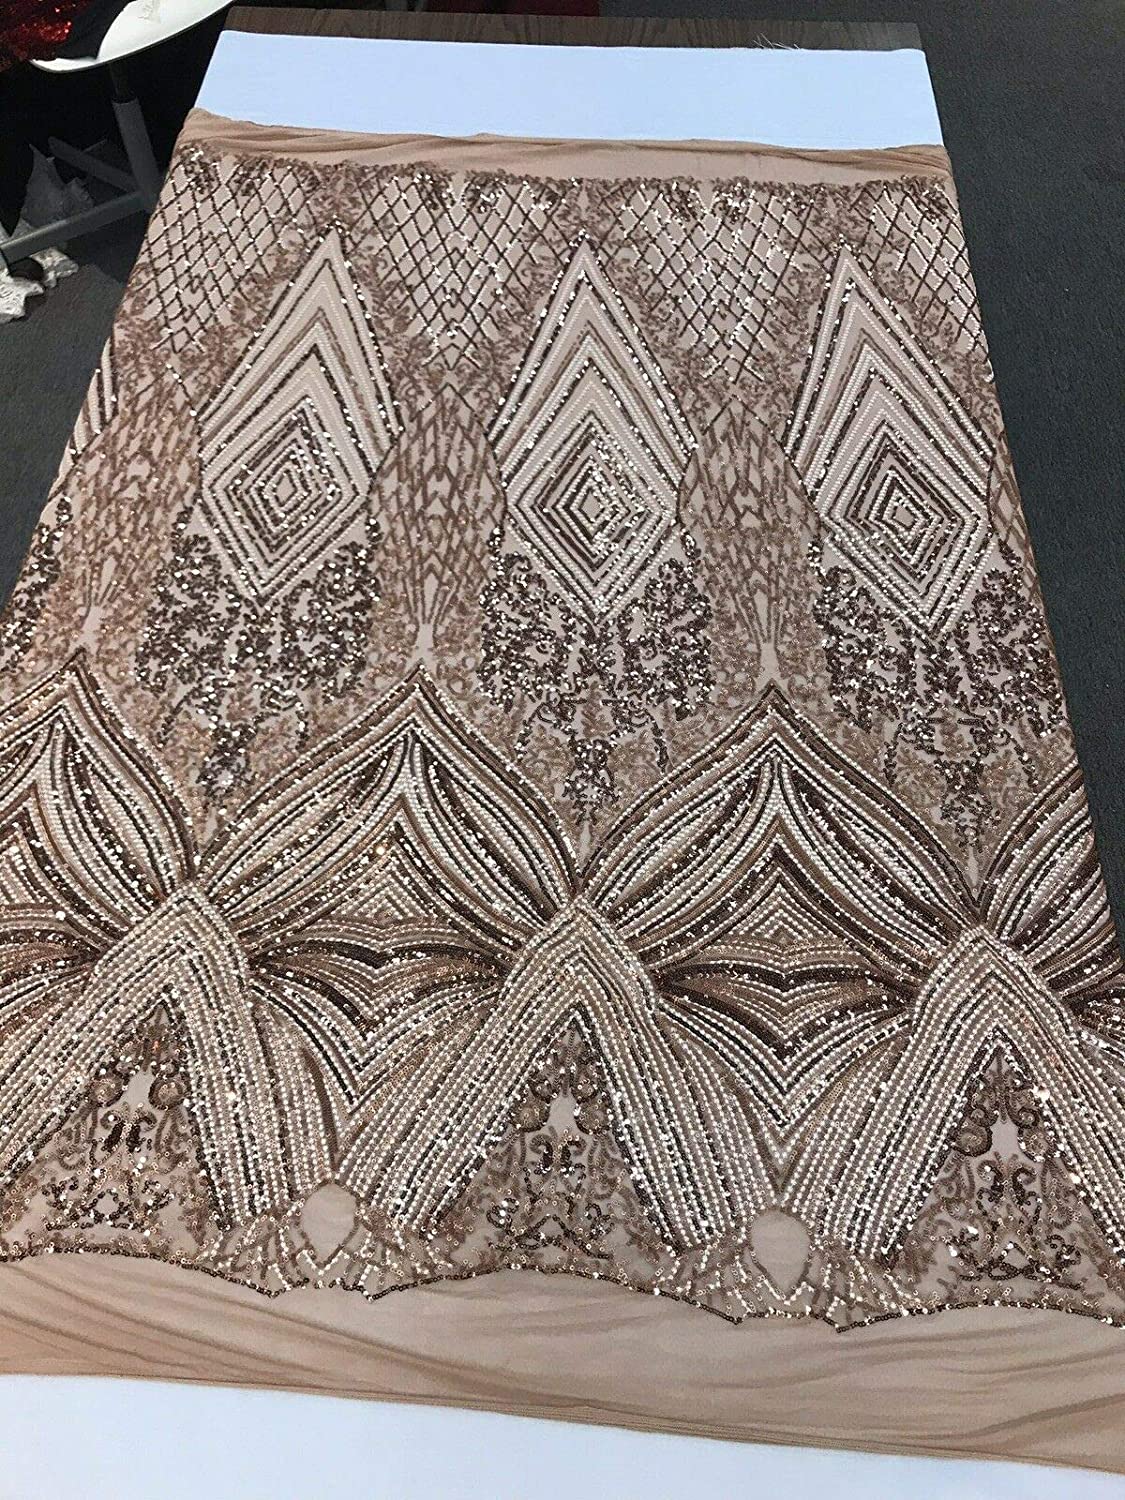 KHAKI-NUDE SEQUIN DIAMOND DESIGN EMBROIDERY ON A 4 WAY STRETCH MESH-SOLD BY